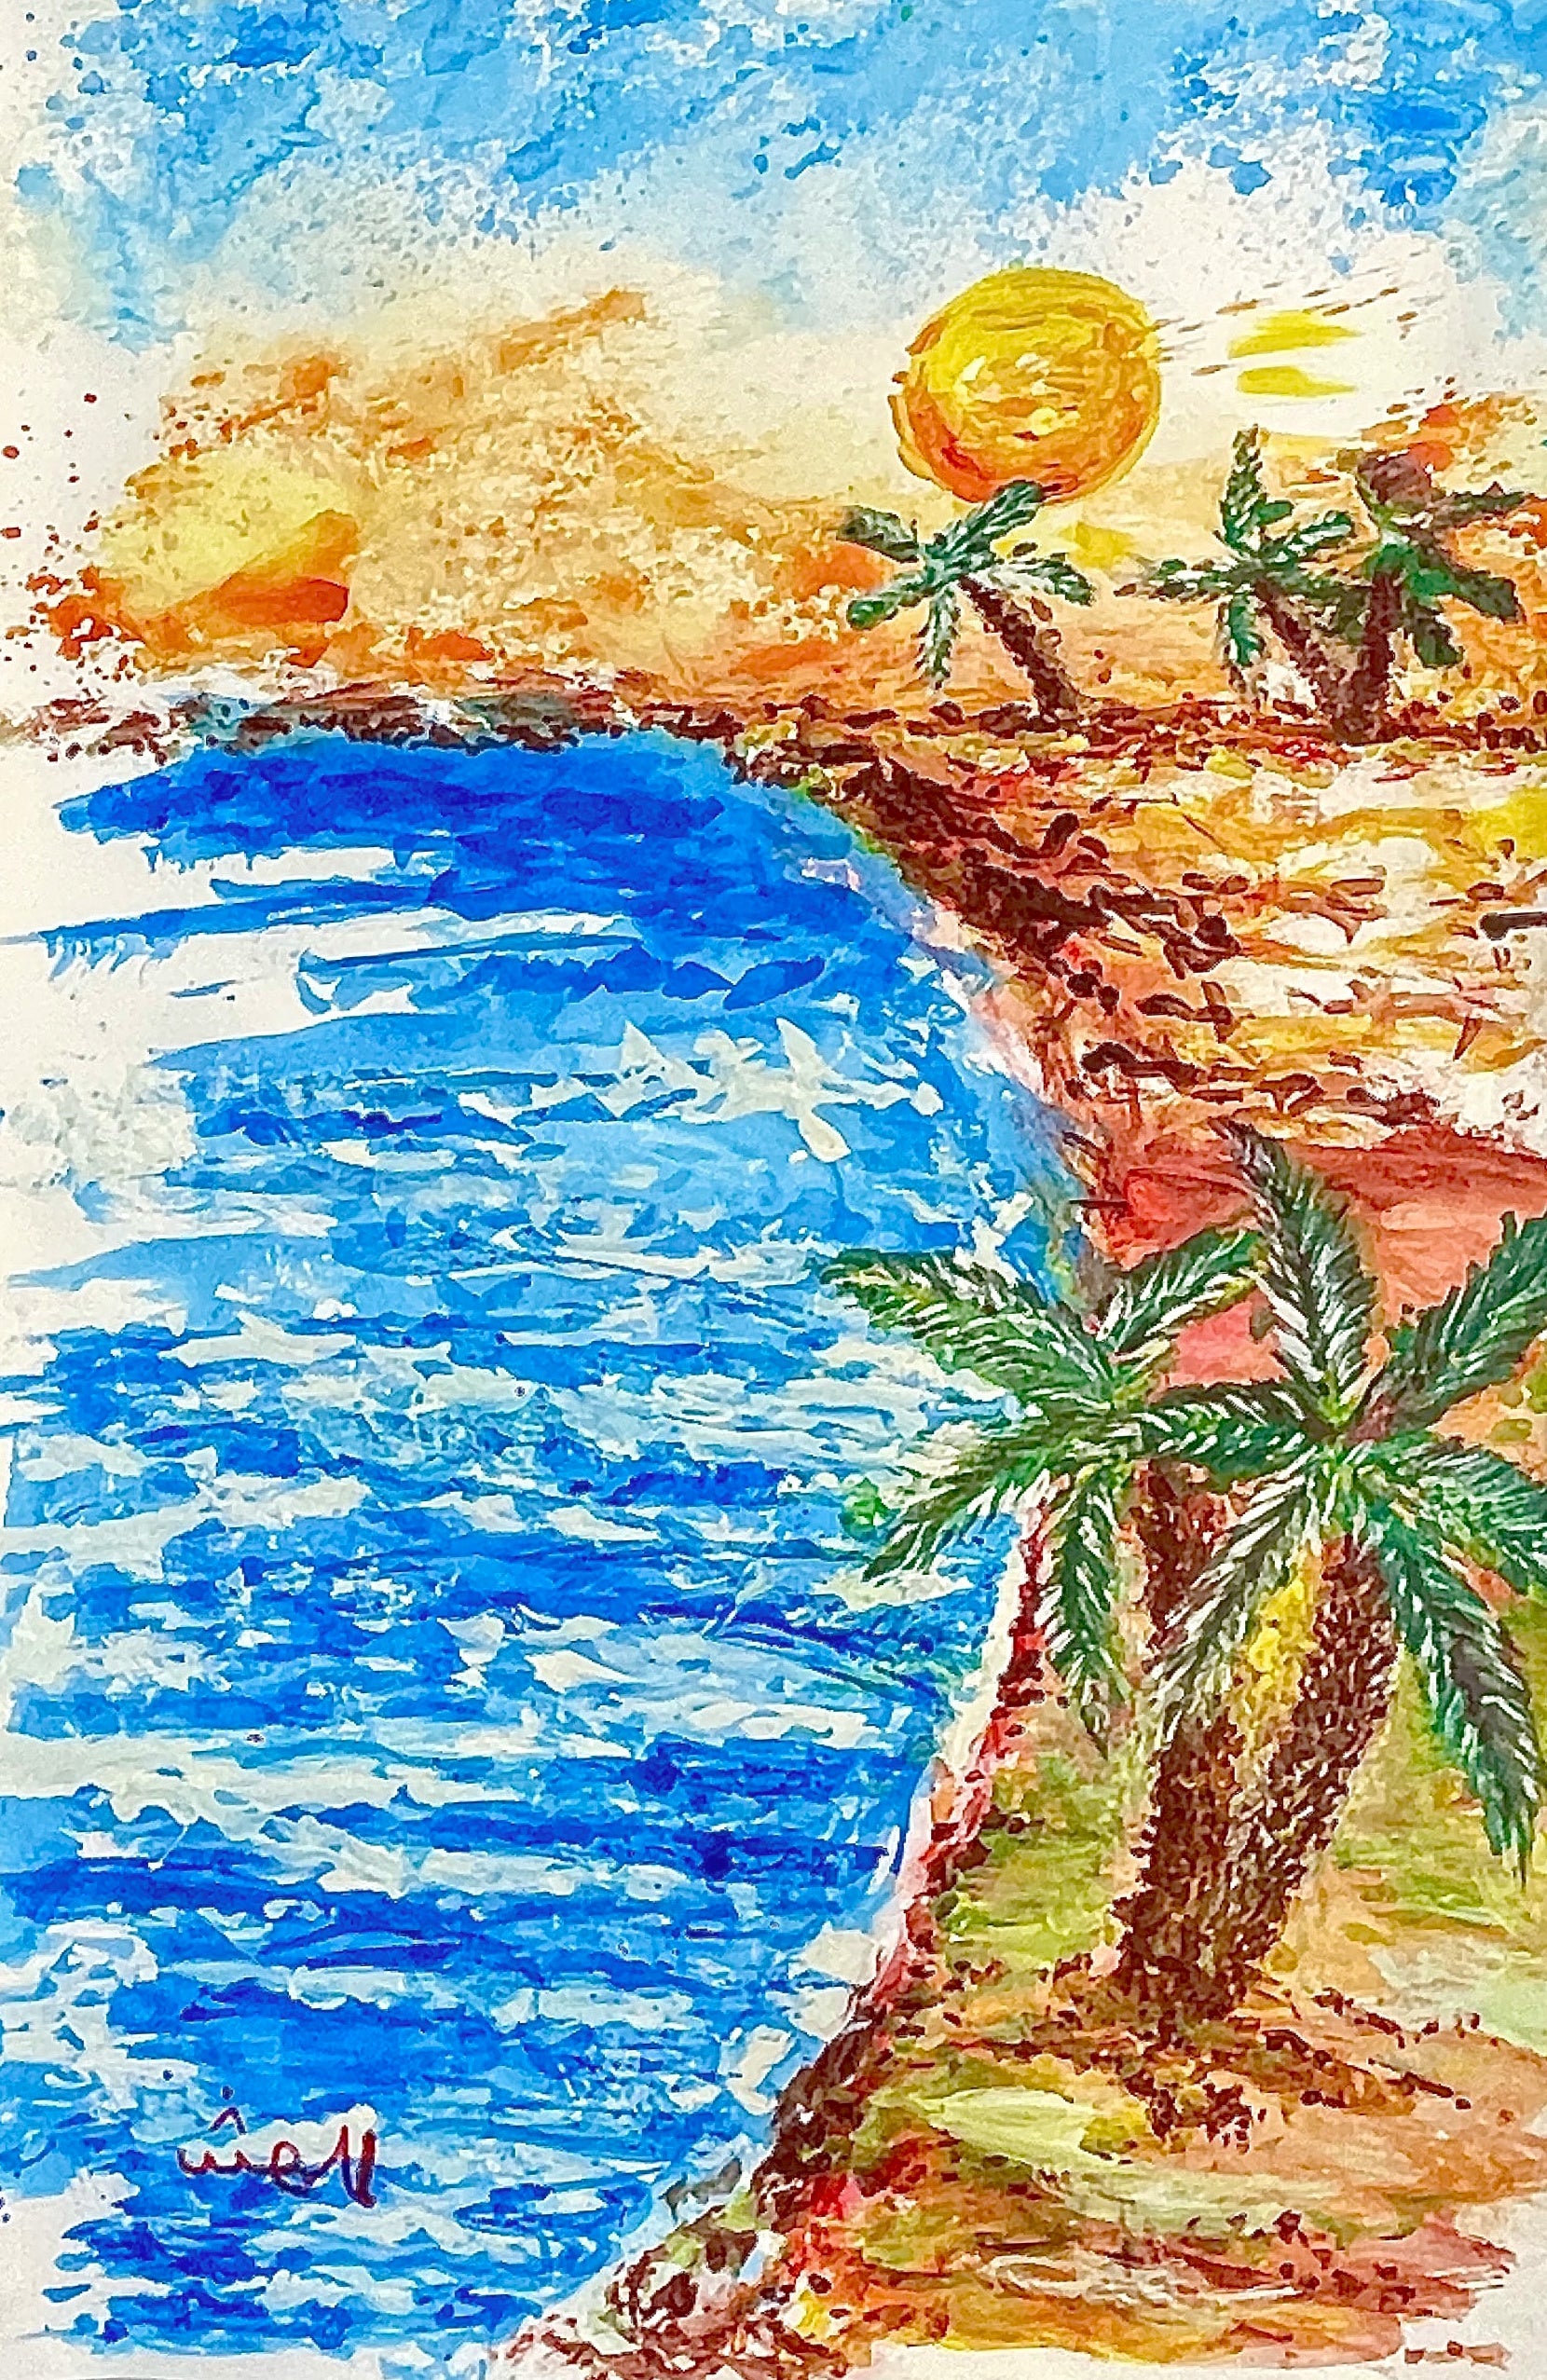 BEHRAYM-Sonarta.com, This beach scene painting is dedicated to everyone in ABADAN . The setting is acsunset at the beach with calm waves. This is a perfect time and place for a walk.  An Acrylic on Canvas Wall Art Decor was created by Shahla Rahimi Reynolds.  The painting is 36” H x 24” W. 